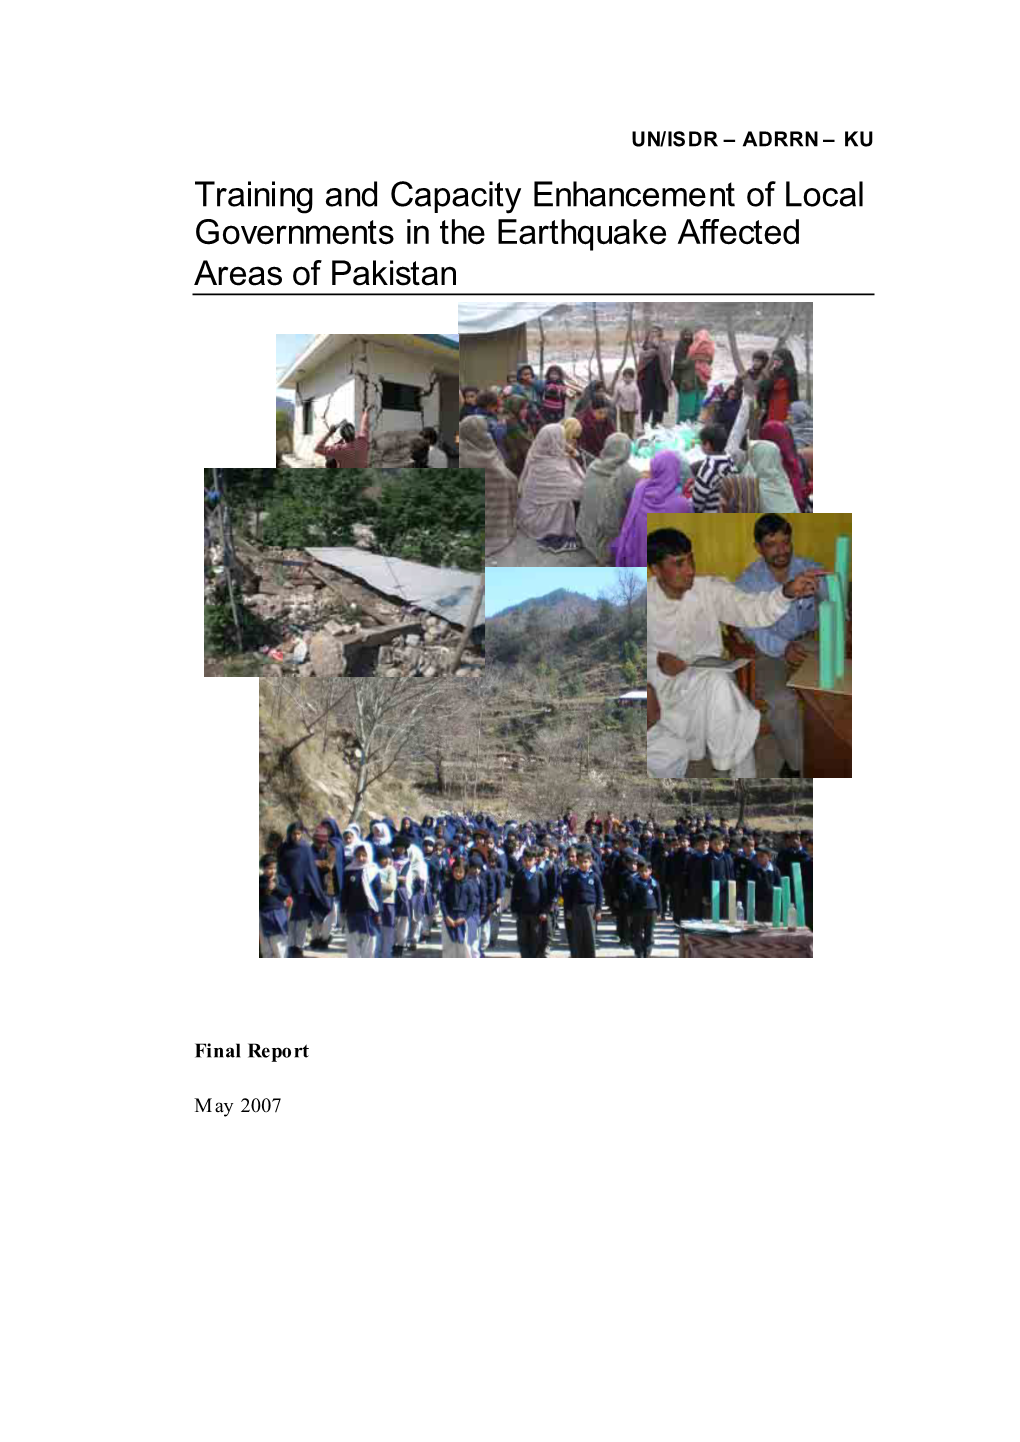 Training and Capacity Enhancement of Local Governments in the Earthquake Affected Areas of Pakistan